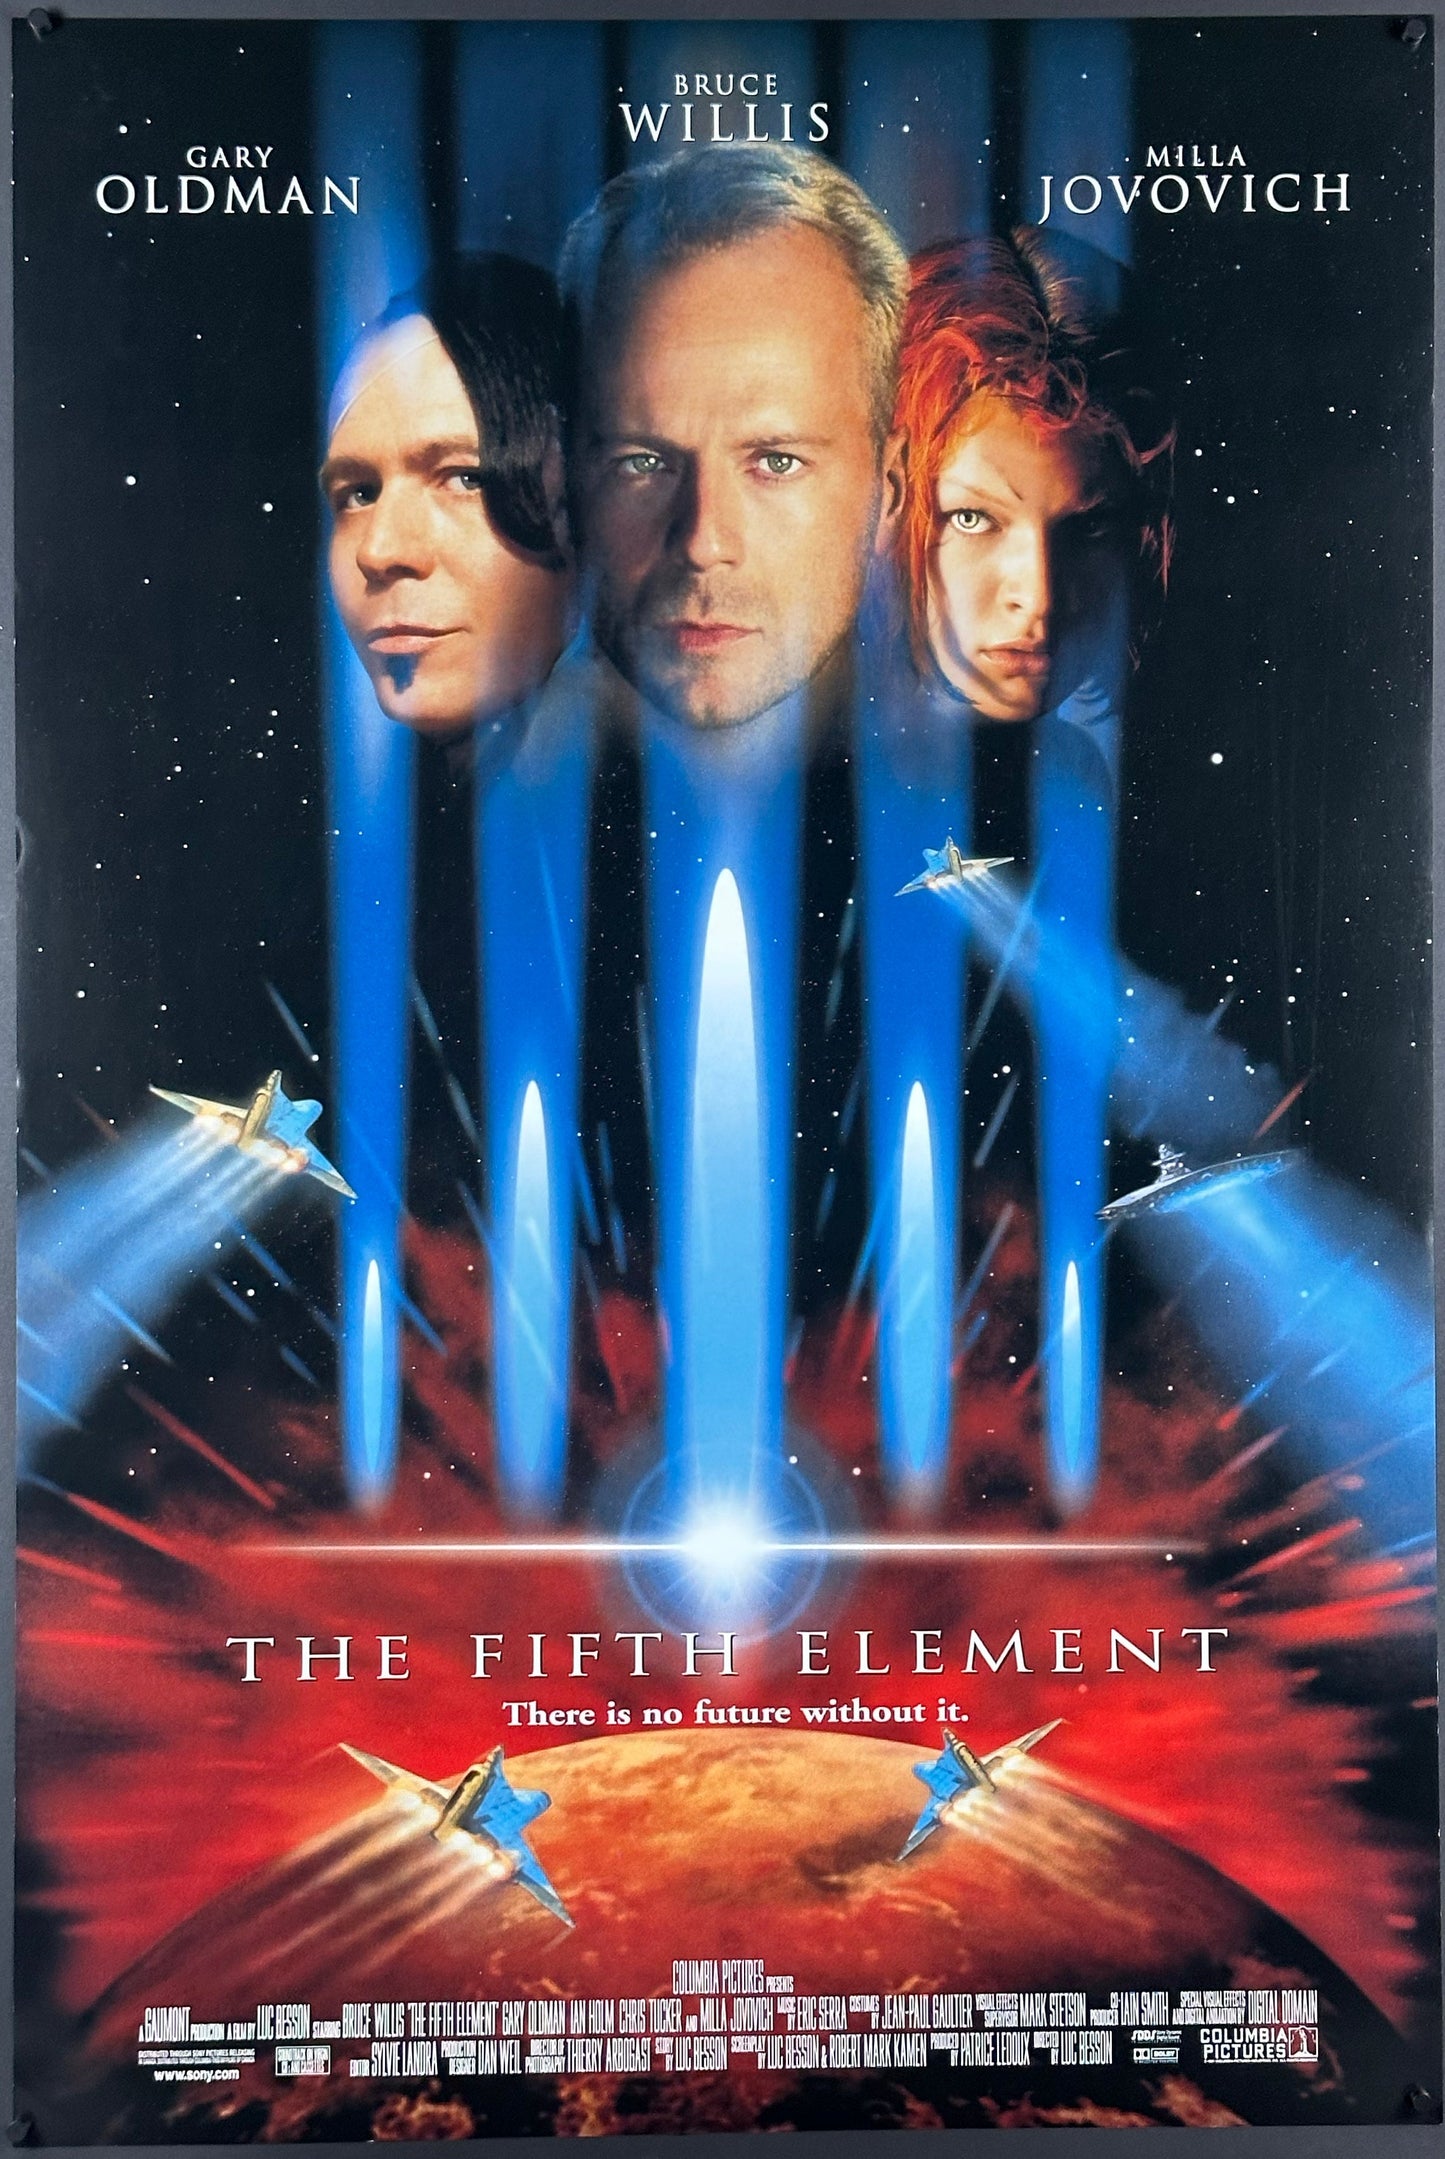 The Fifth Element US One Sheet (1997) - ORIGINAL RELEASE - posterpalace.com